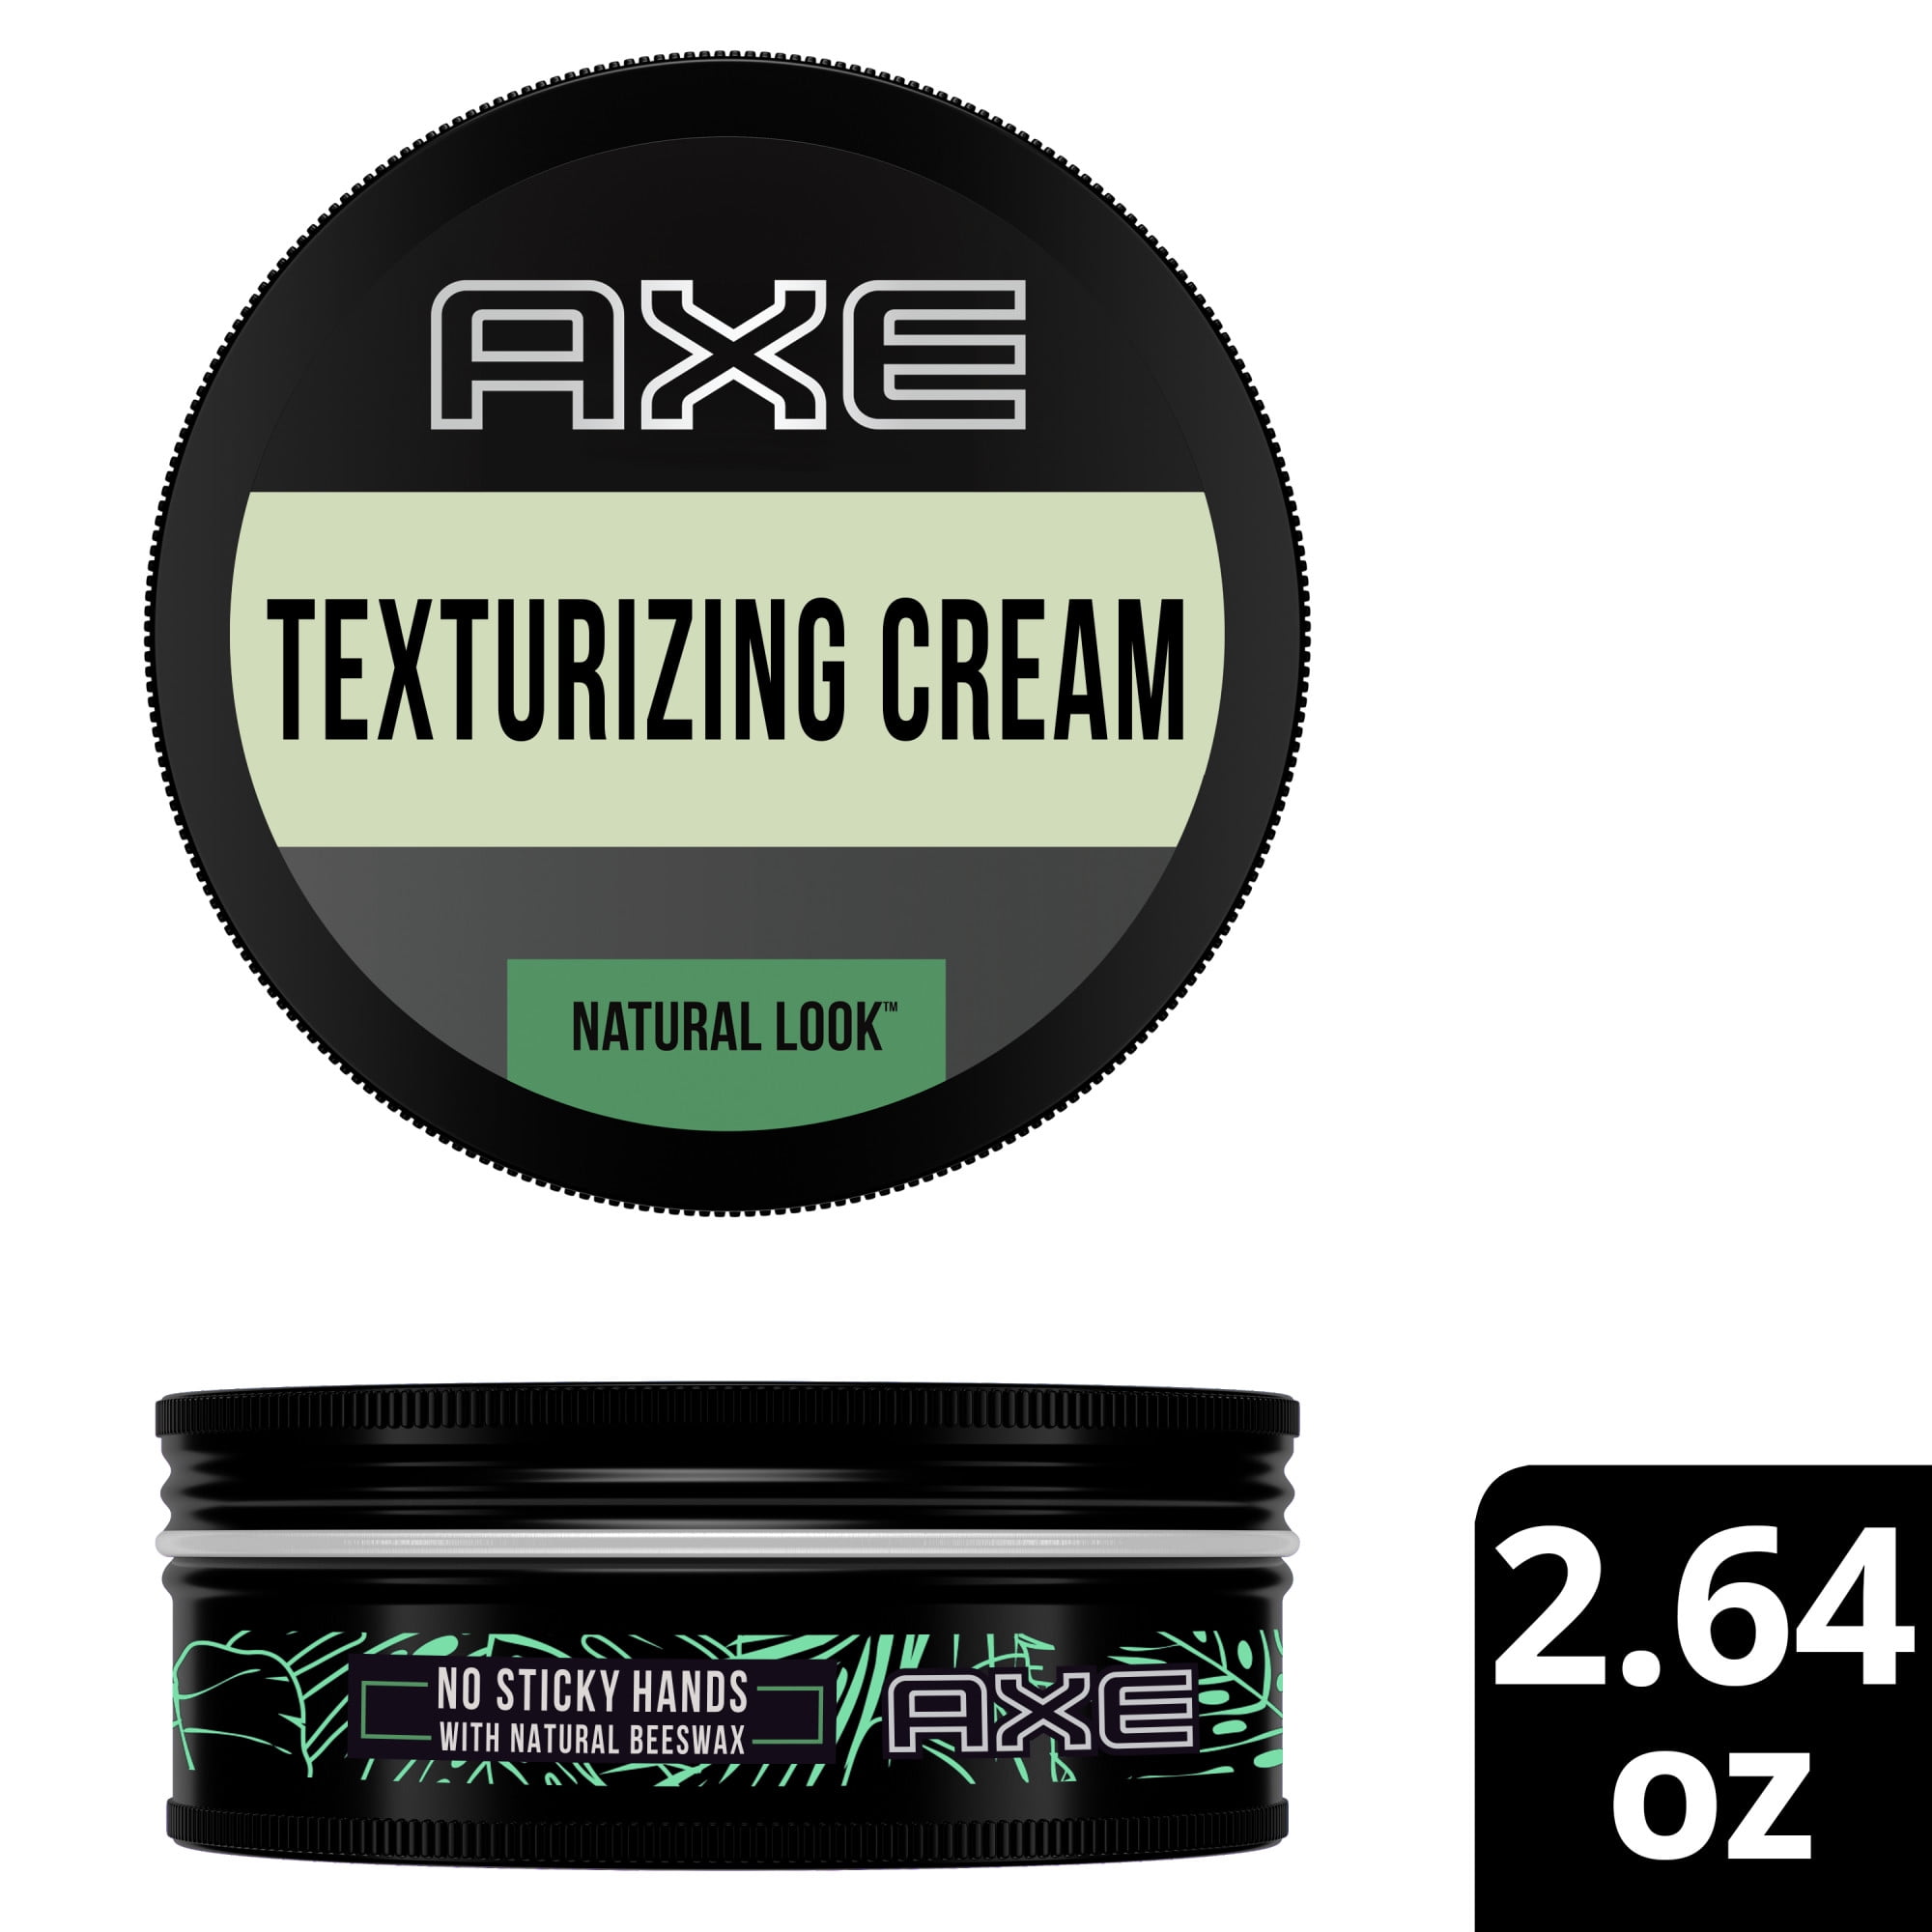 Axe Natural Look Texturizing Hair Styling Cream Hair Gel with Natural Beeswax, 2.64 oz - image 1 of 5